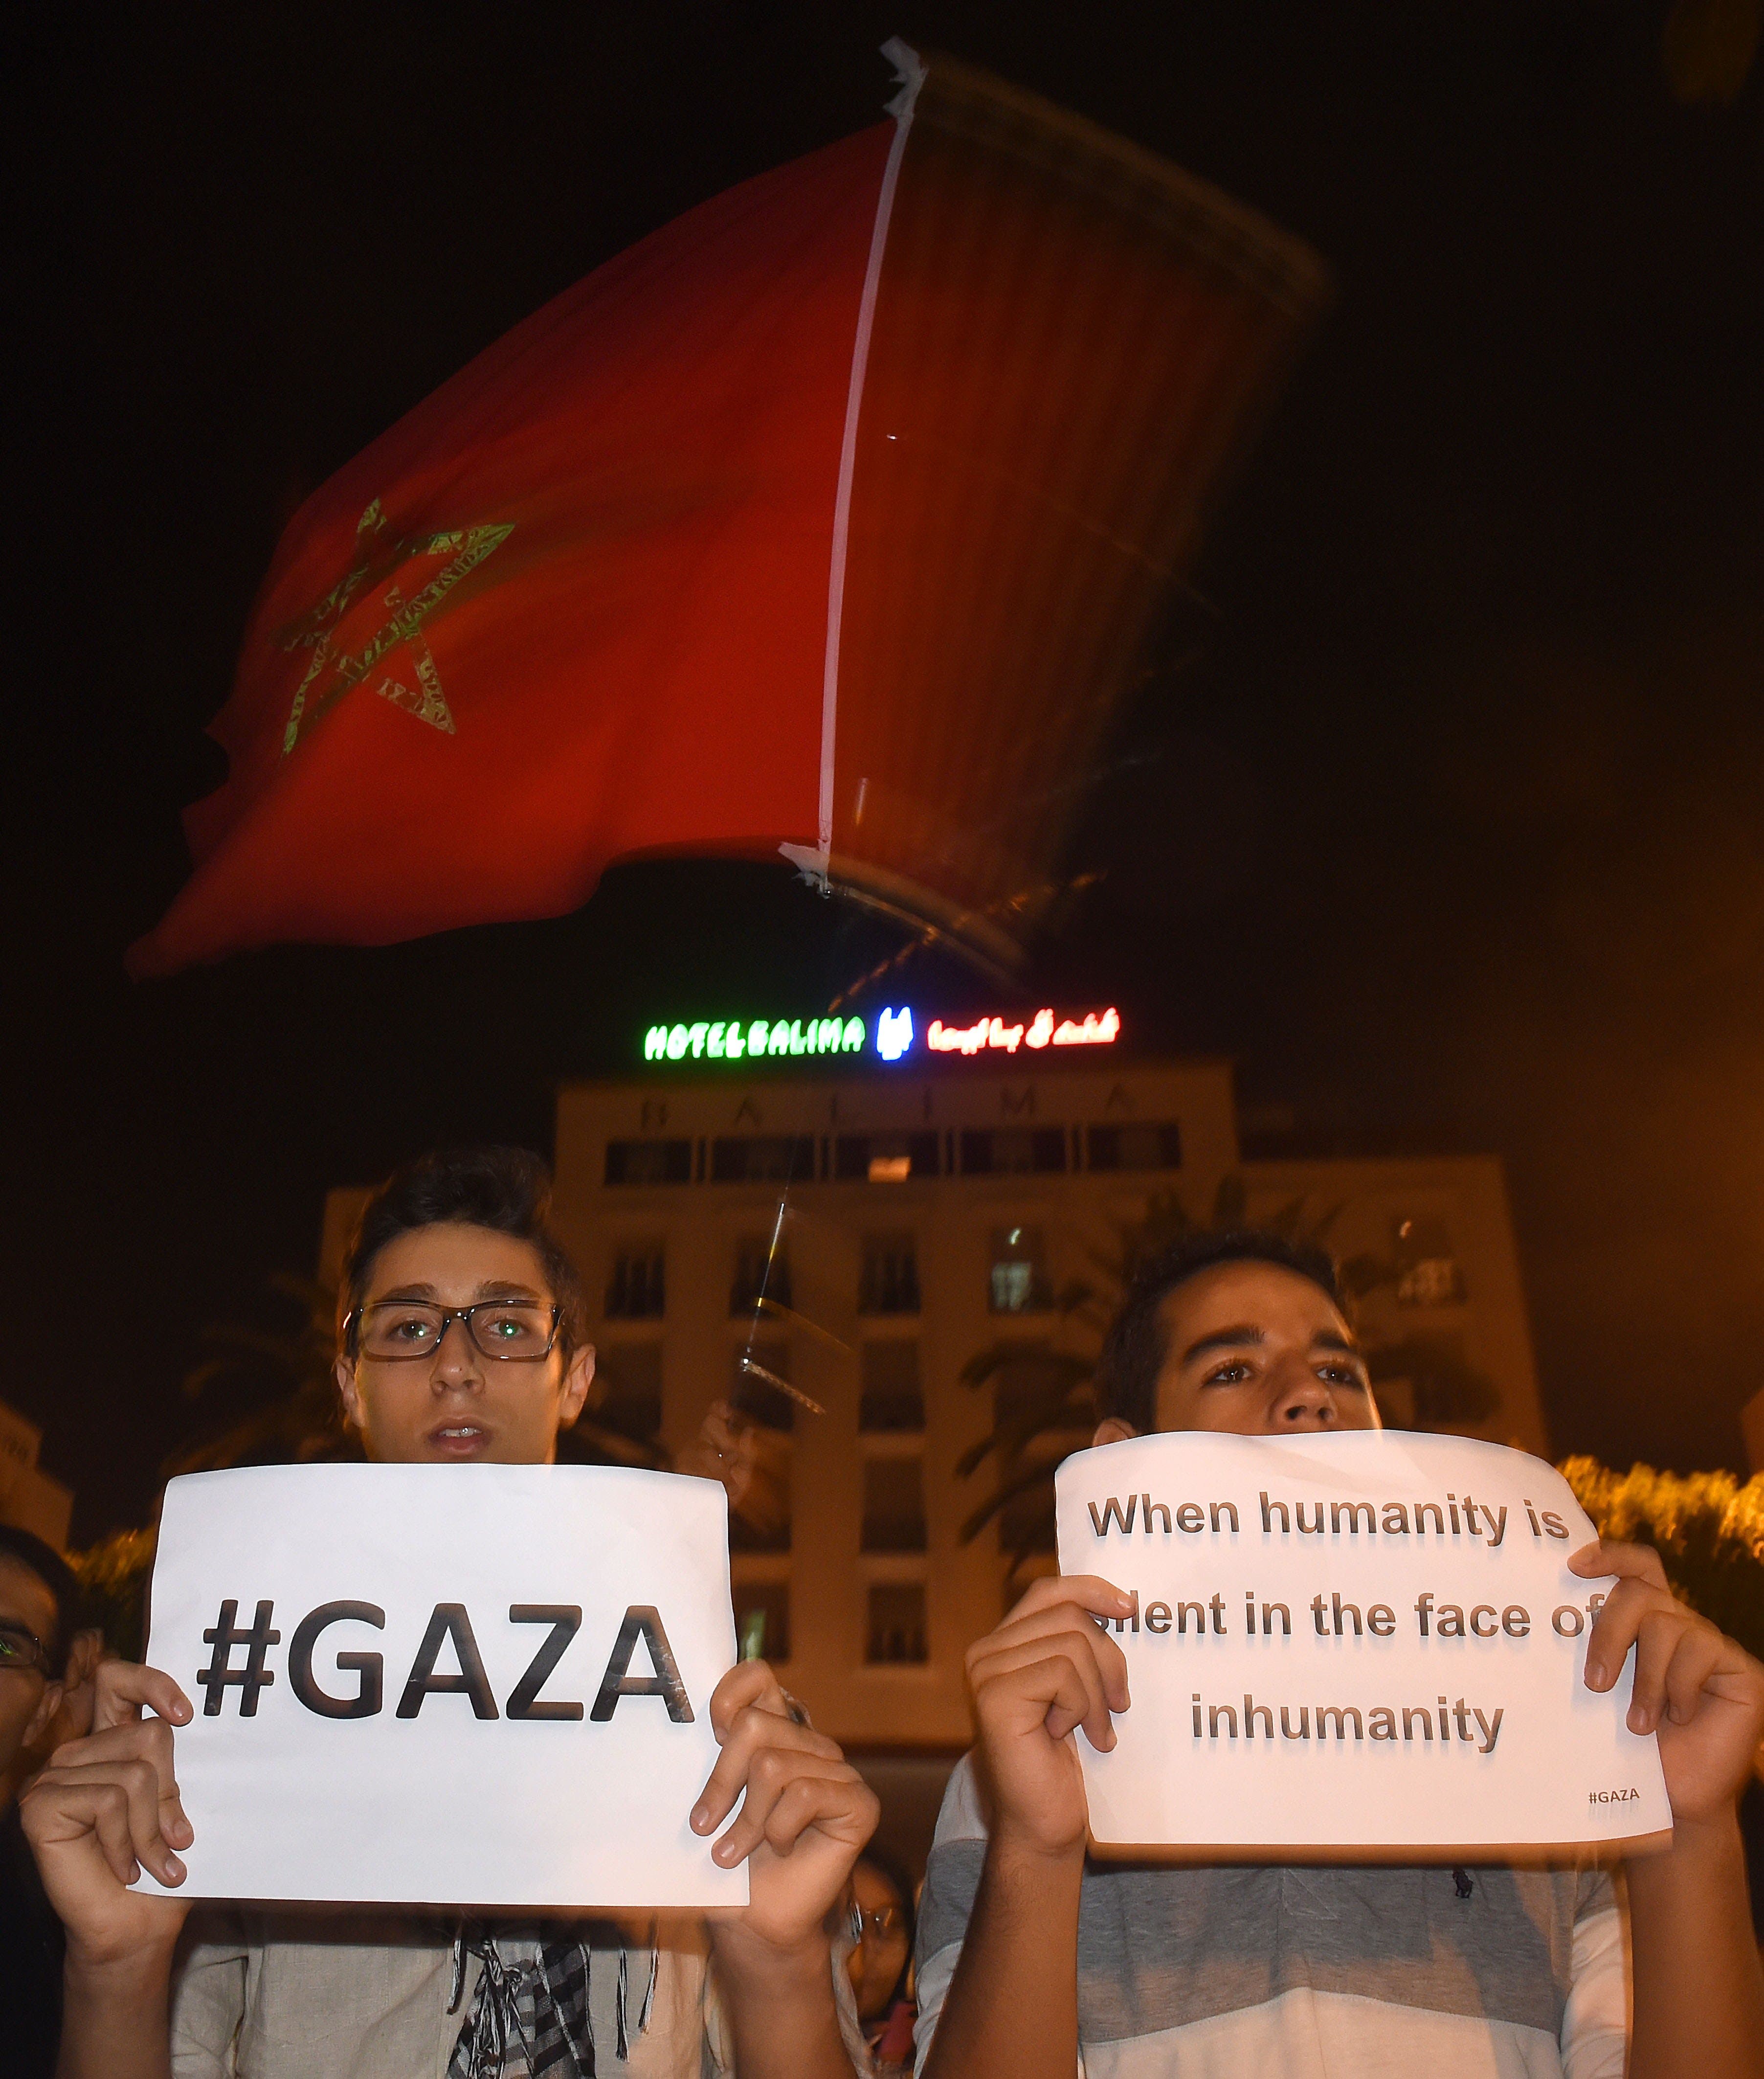 Moroccans take to the streets for Gaza